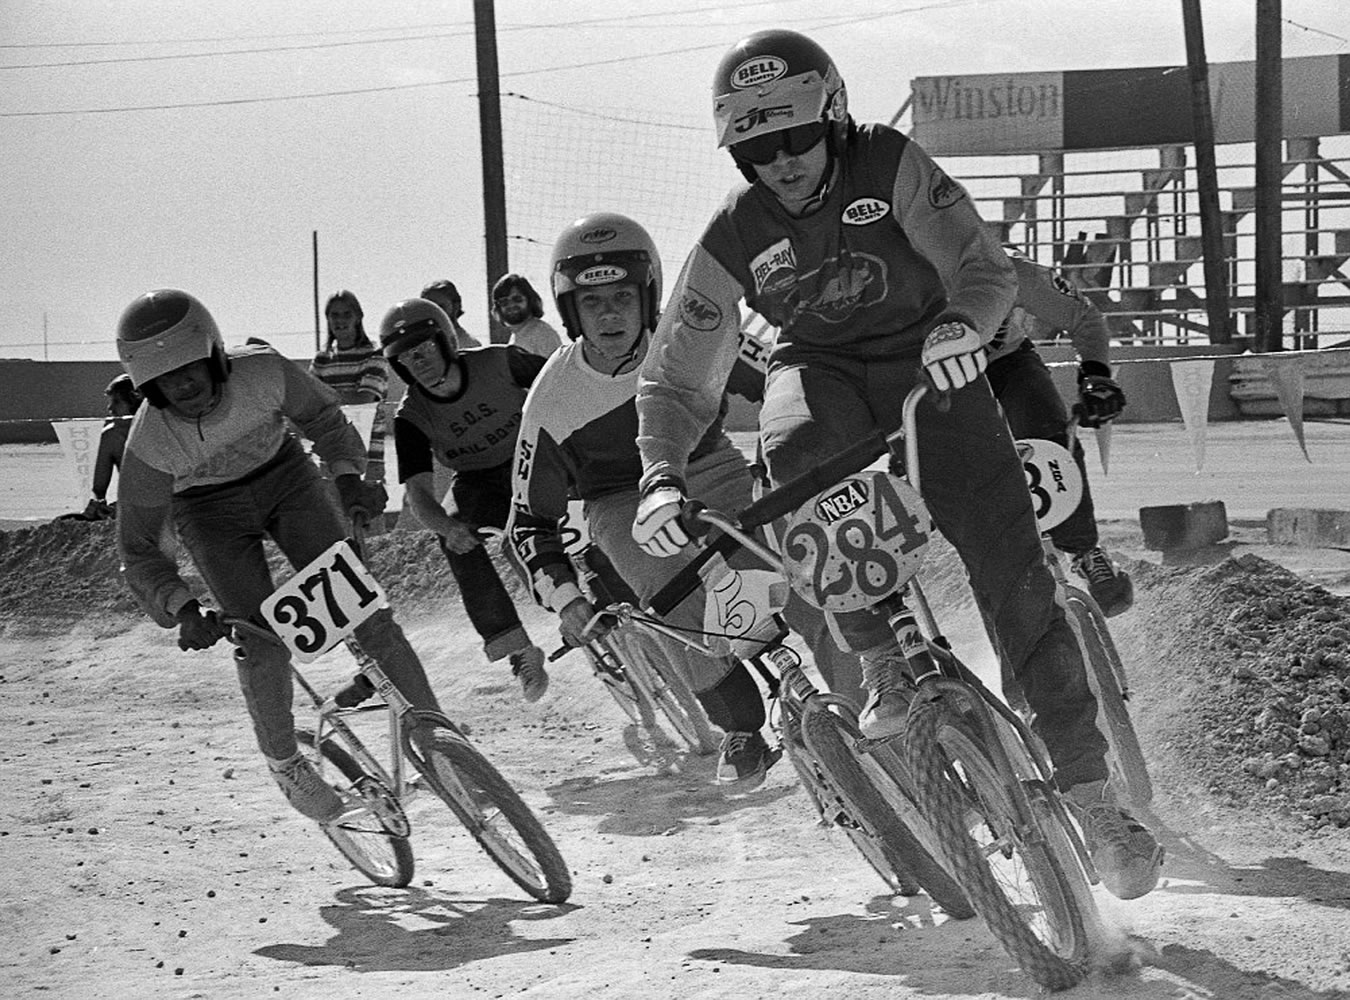 In this 1976 photo provided by USA BMX, Scot Breithaupt leads the pack in a BMX bicycle race in Las Vegas. Scot Alexander Breithaupt, who organized bicycle races on dirt motorcycle courses in the early 1970s, becoming a founder of BMX and later a champion and one of the cycling sport's best known figures, died in Indio, Calif., authorities said Monday, July 6, 2015.